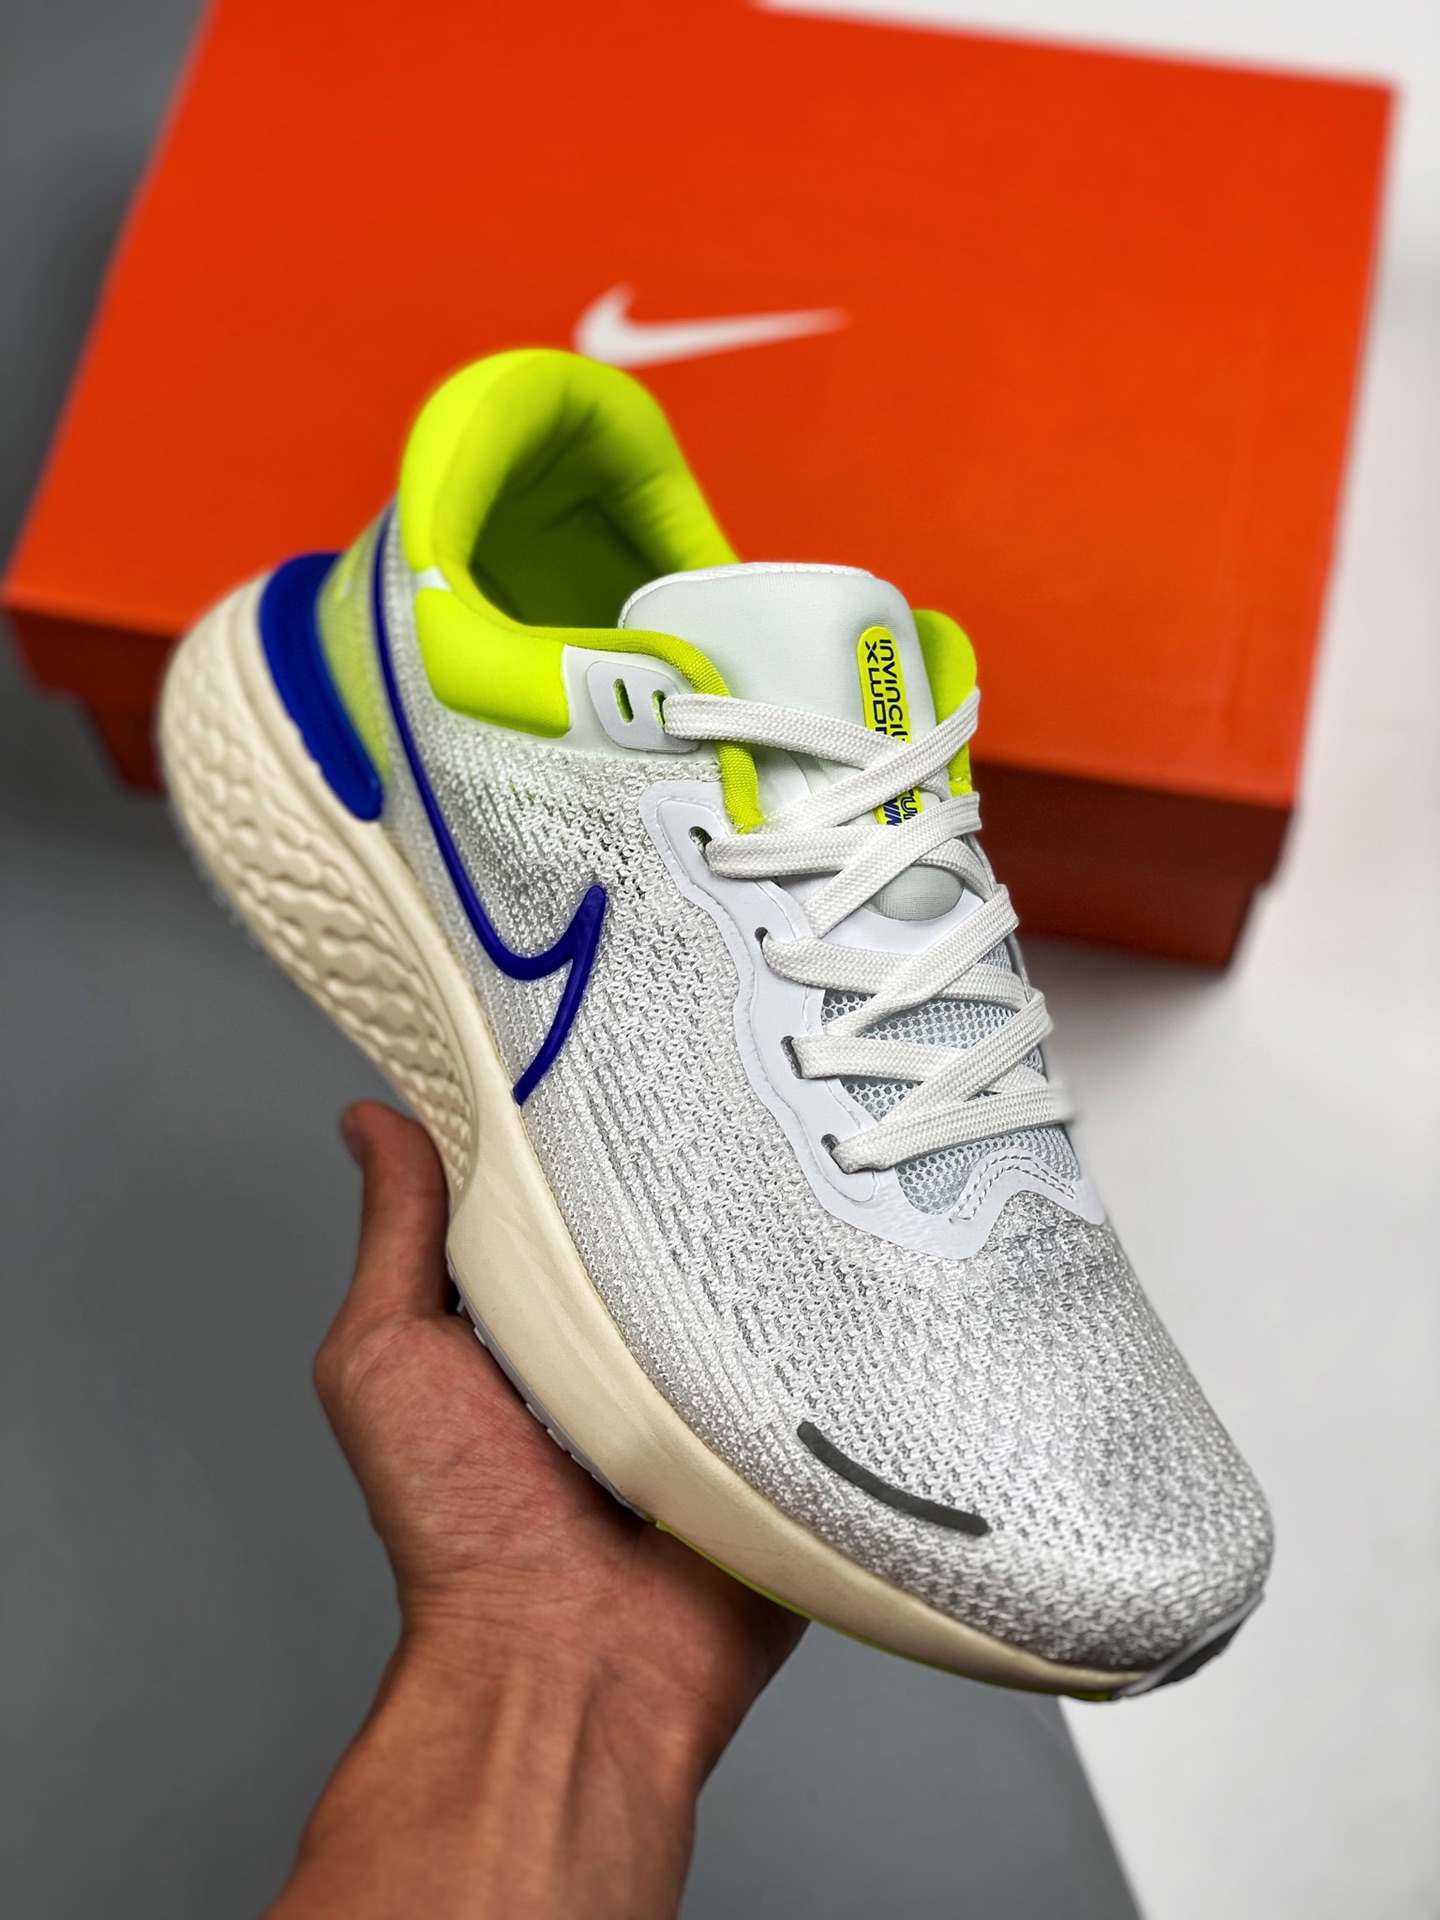 Nike ZoomX Invincible Run Flyknit White/Cyber/Grey Fog/Racer Blue Shoes